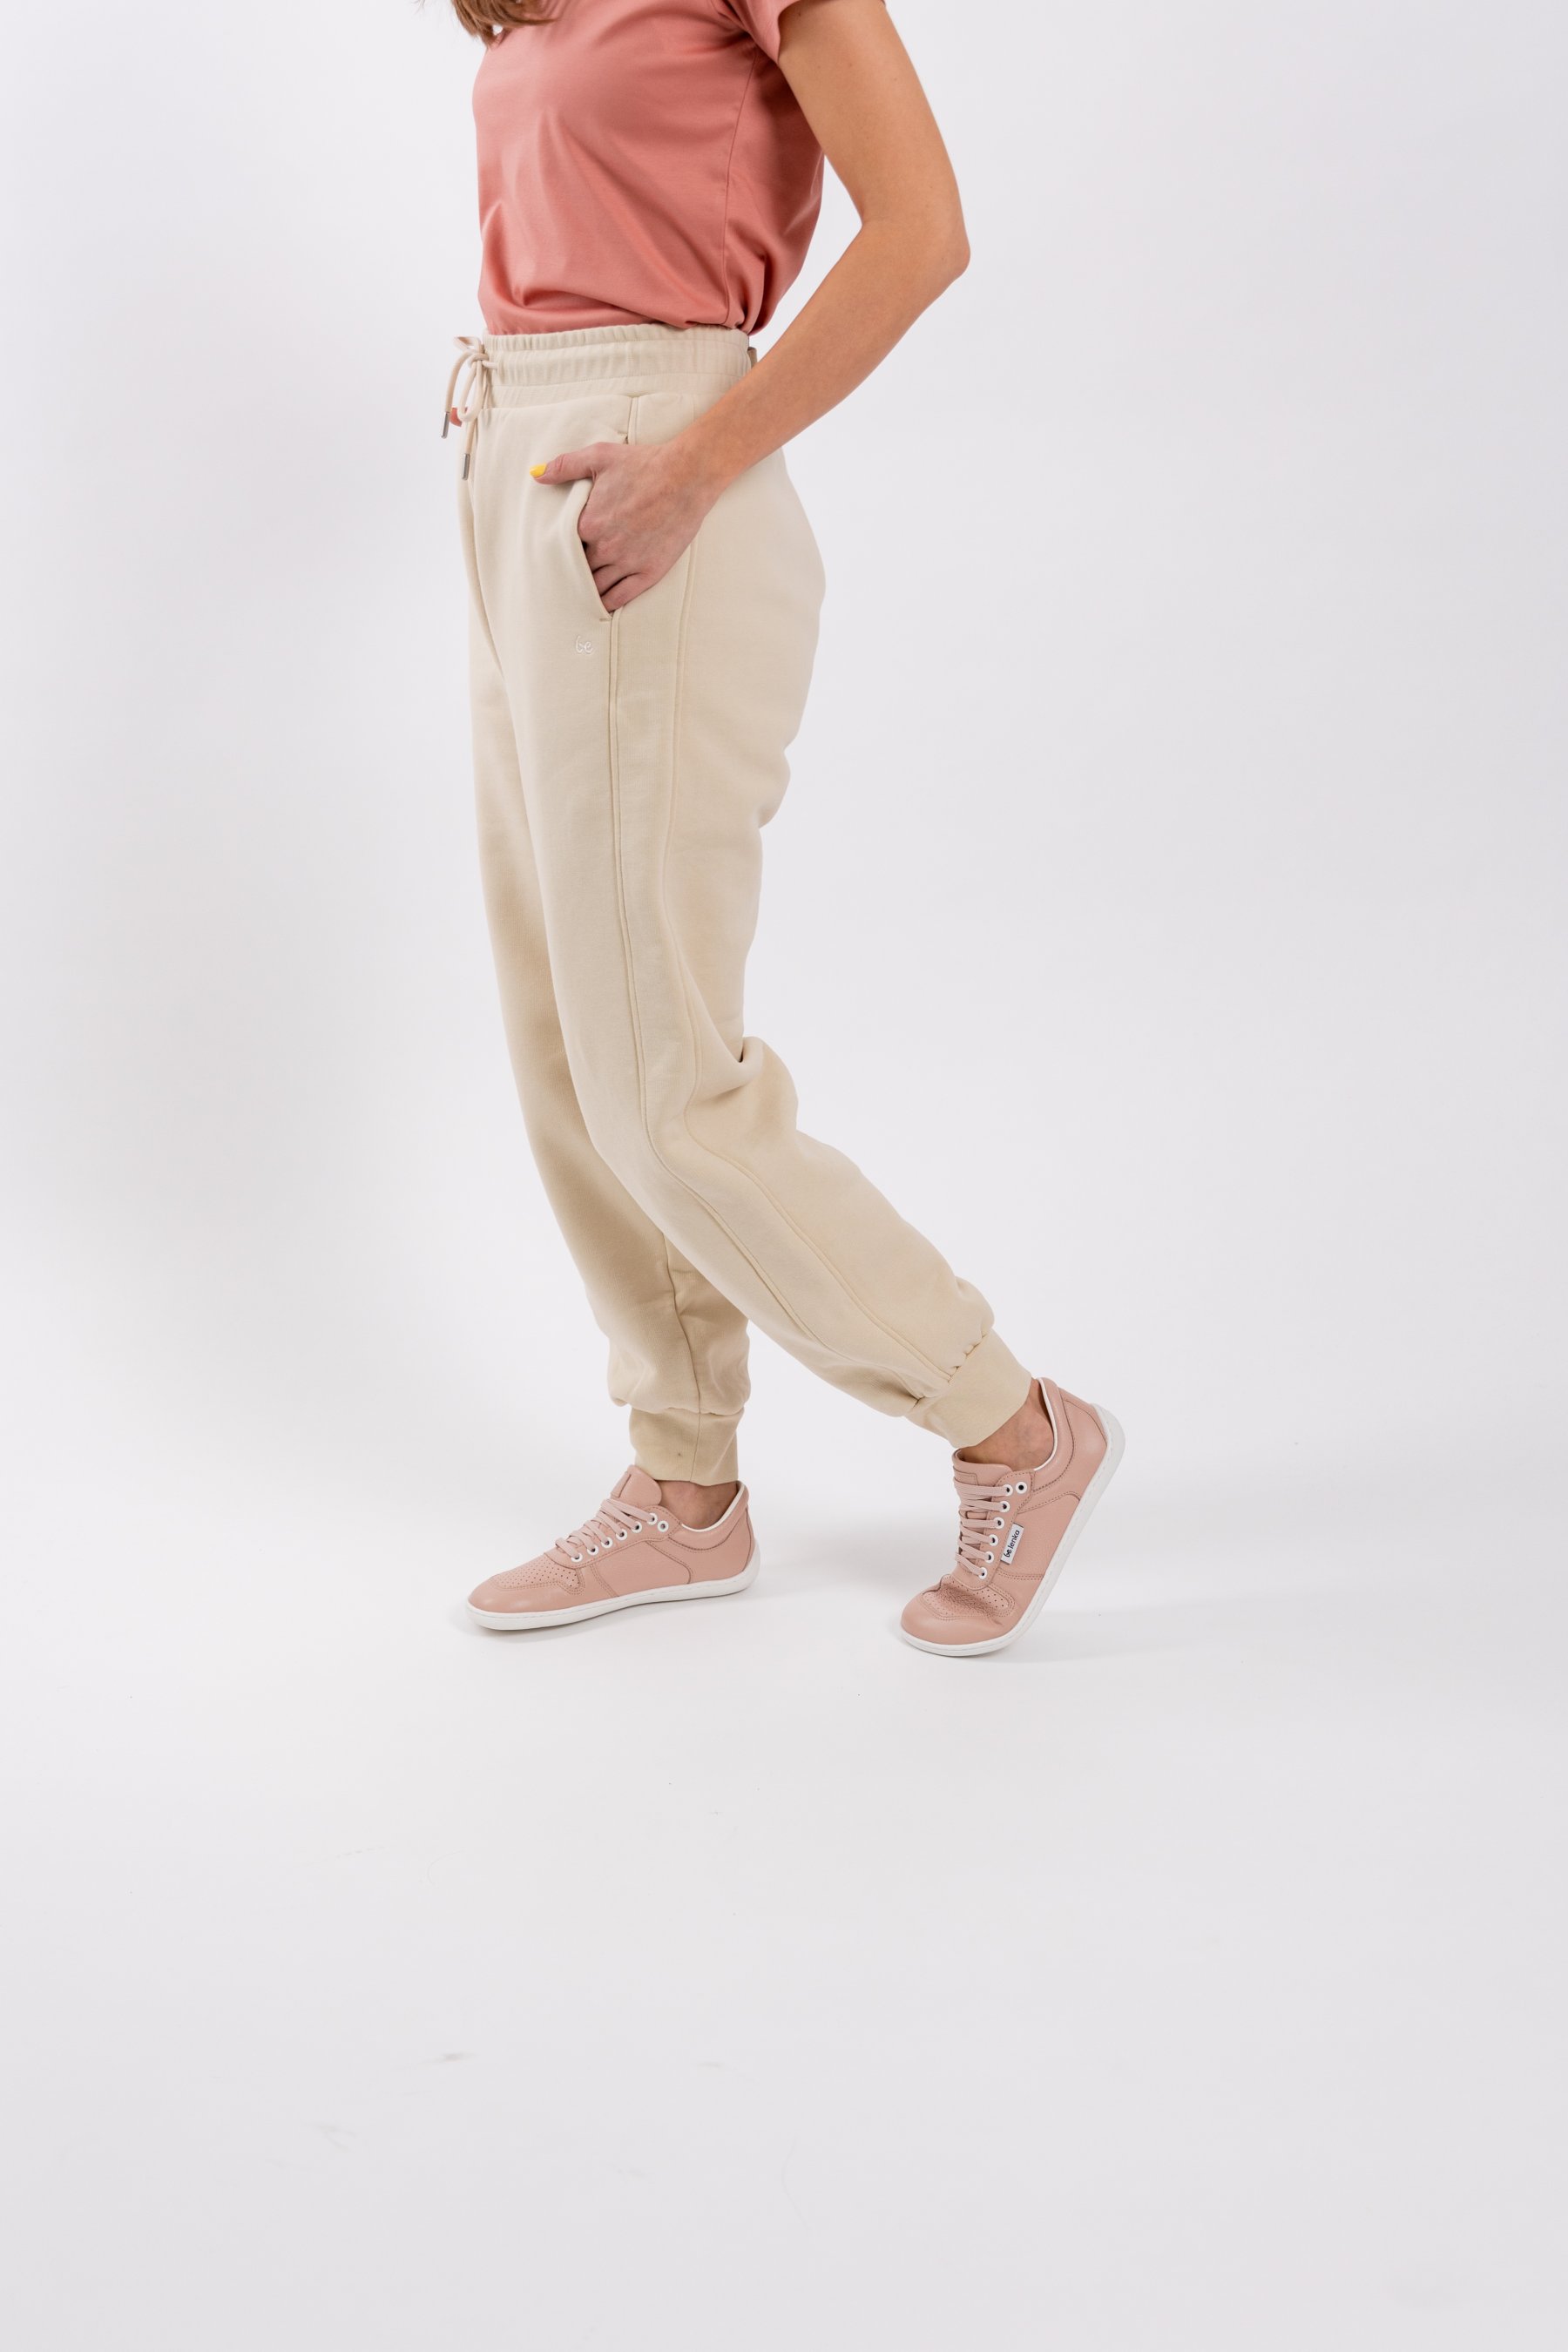 What Dress Shoes and Sneakers to Wear with Chinos - Hockerty